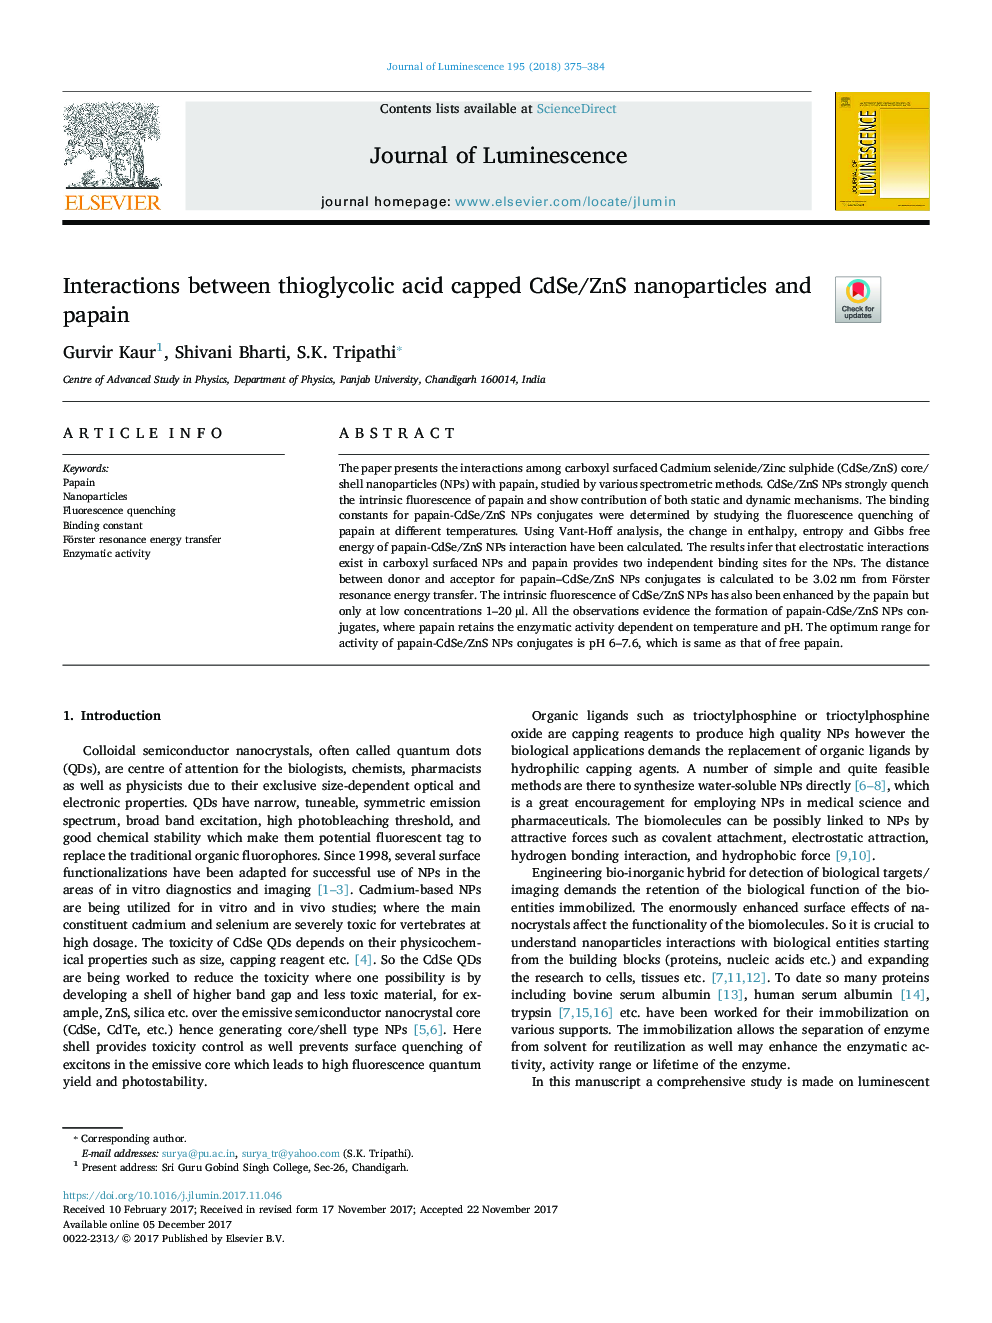 Interactions between thioglycolic acid capped CdSe/ZnS nanoparticles and papain